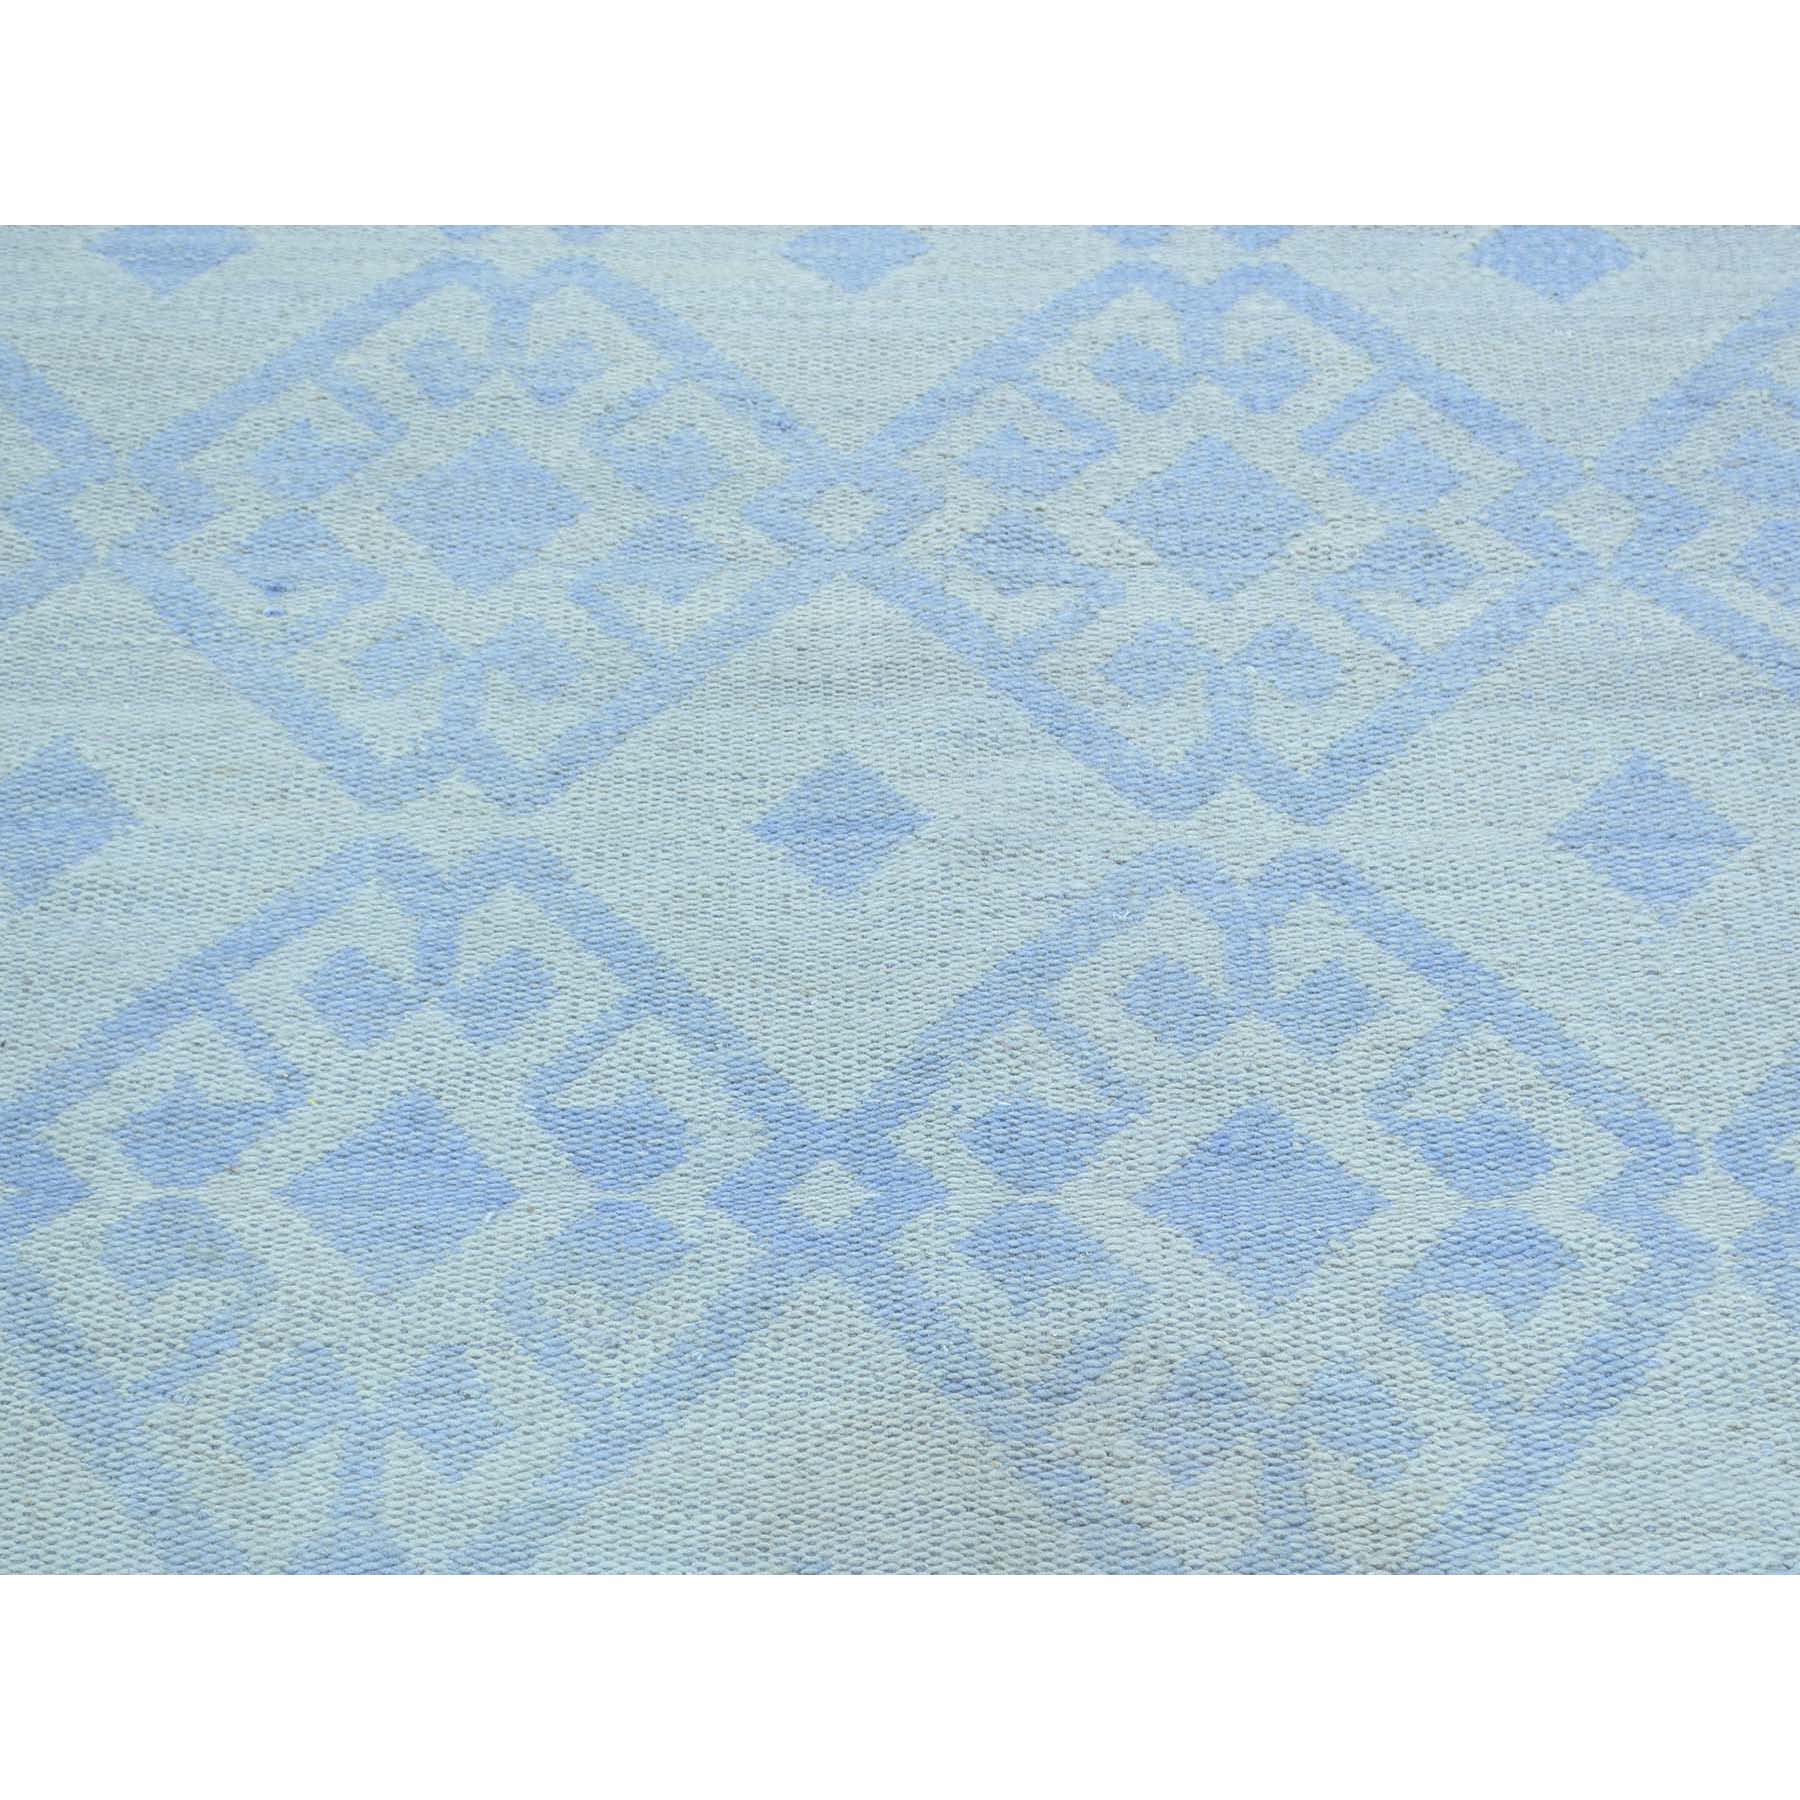 7'10"x7'10" Hand-Woven Flat Weave Reversible Durie Kilim Square Rug 